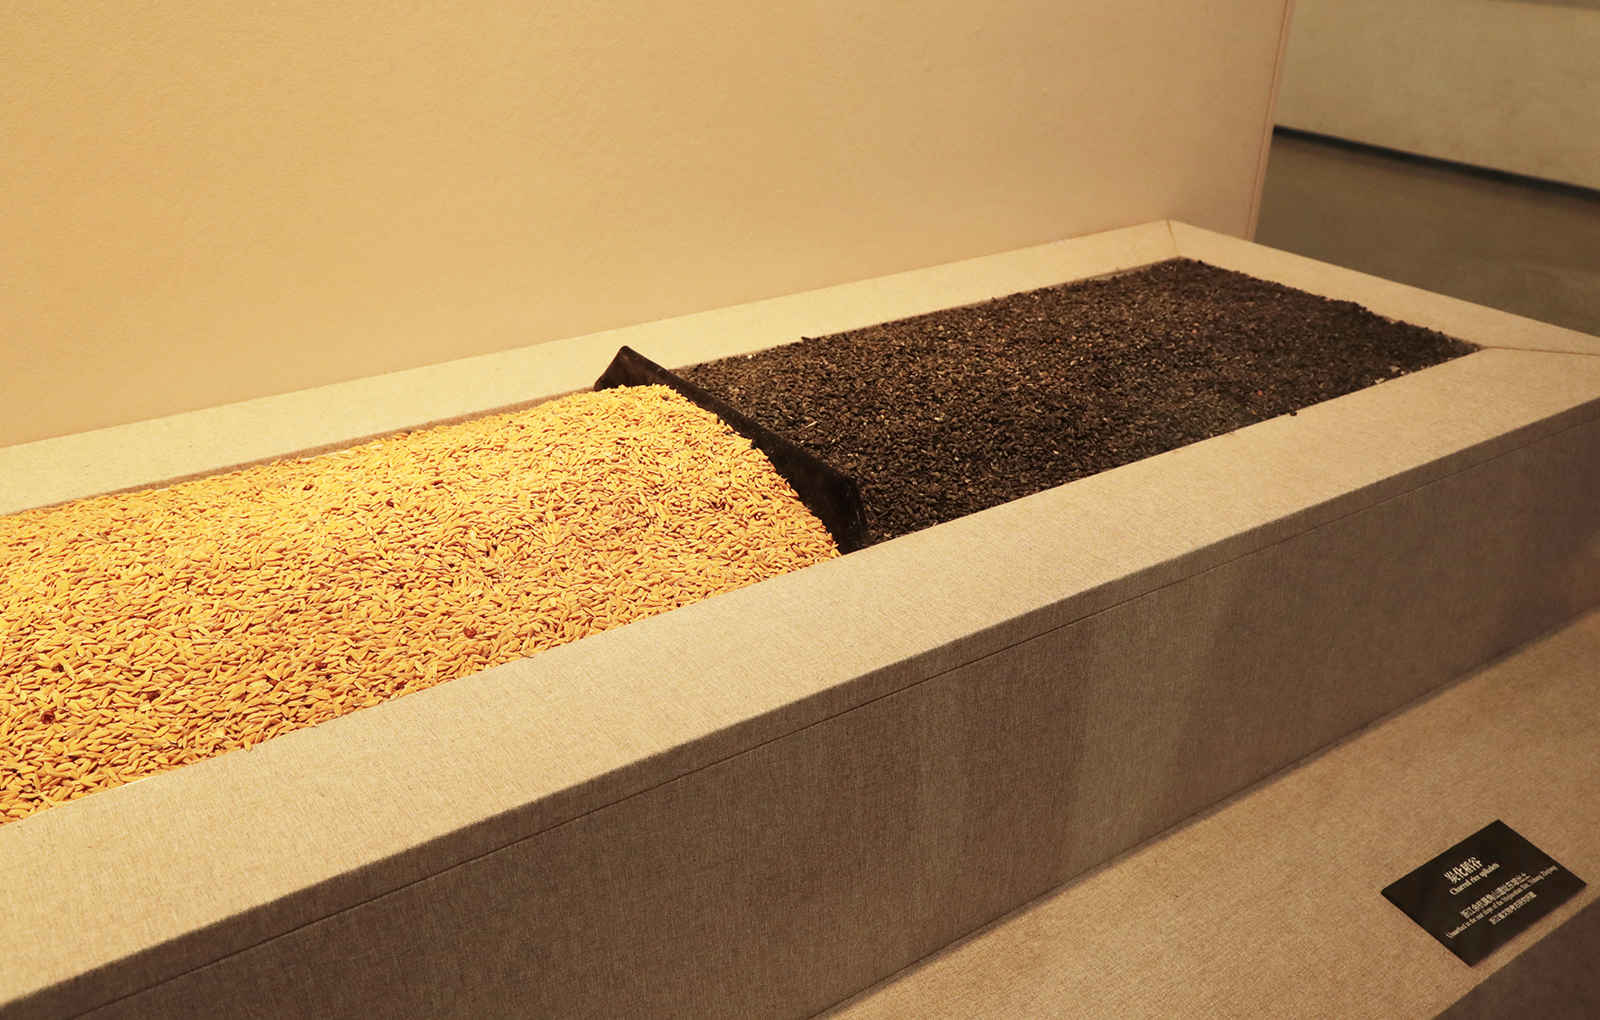 Charred rice spikelets dating back over 5,000 years are on display alongside modern-day rice at the Liangzhu Museum in Hangzhou, Zhejiang Province. /CGTN